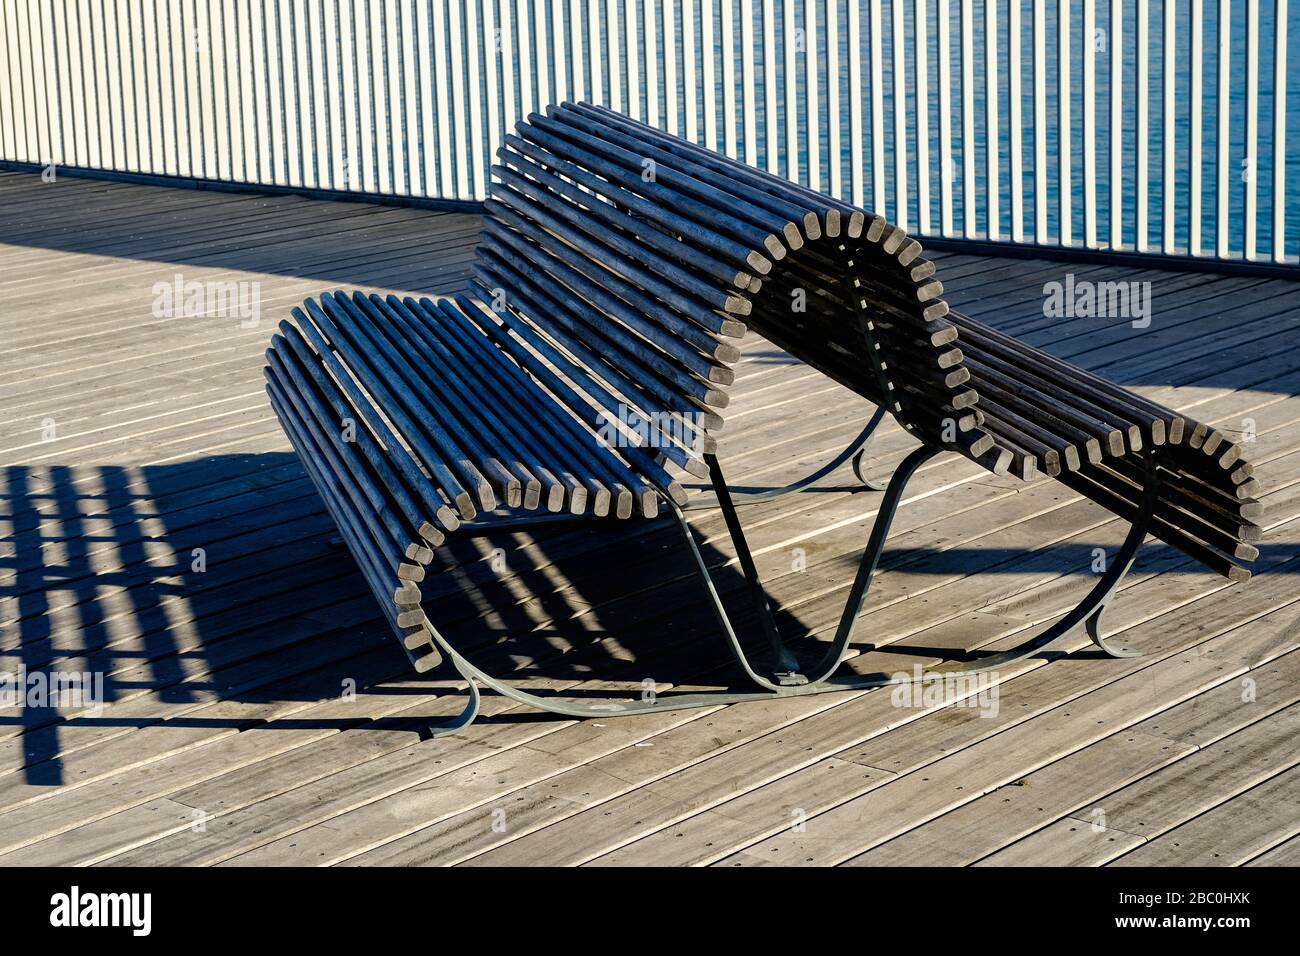 Bench for visitors to relax and enjoy the view on Hastings Pier, East Sussex, UK Stock Photo